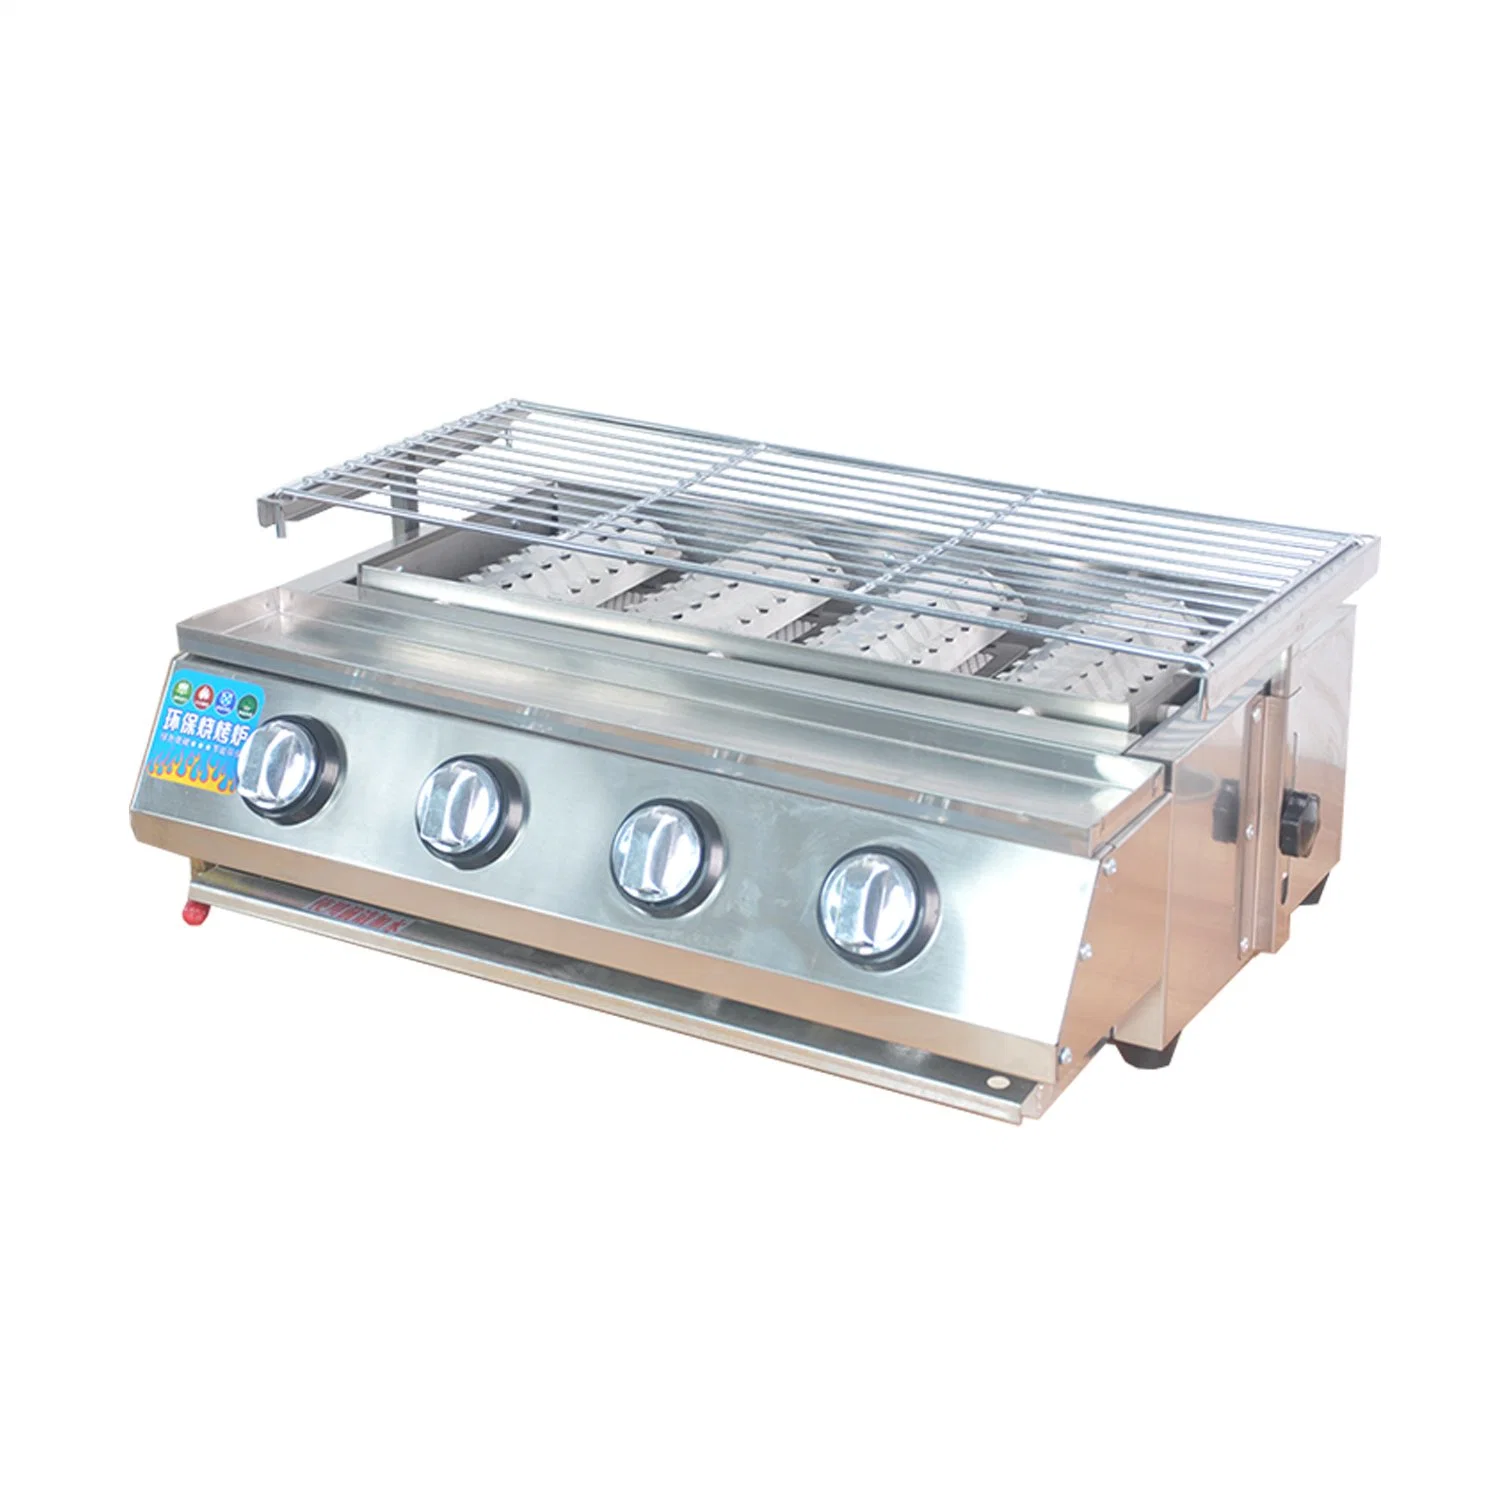 Professional Portable Commercial Smokeless BBQ Grill for Restaurant